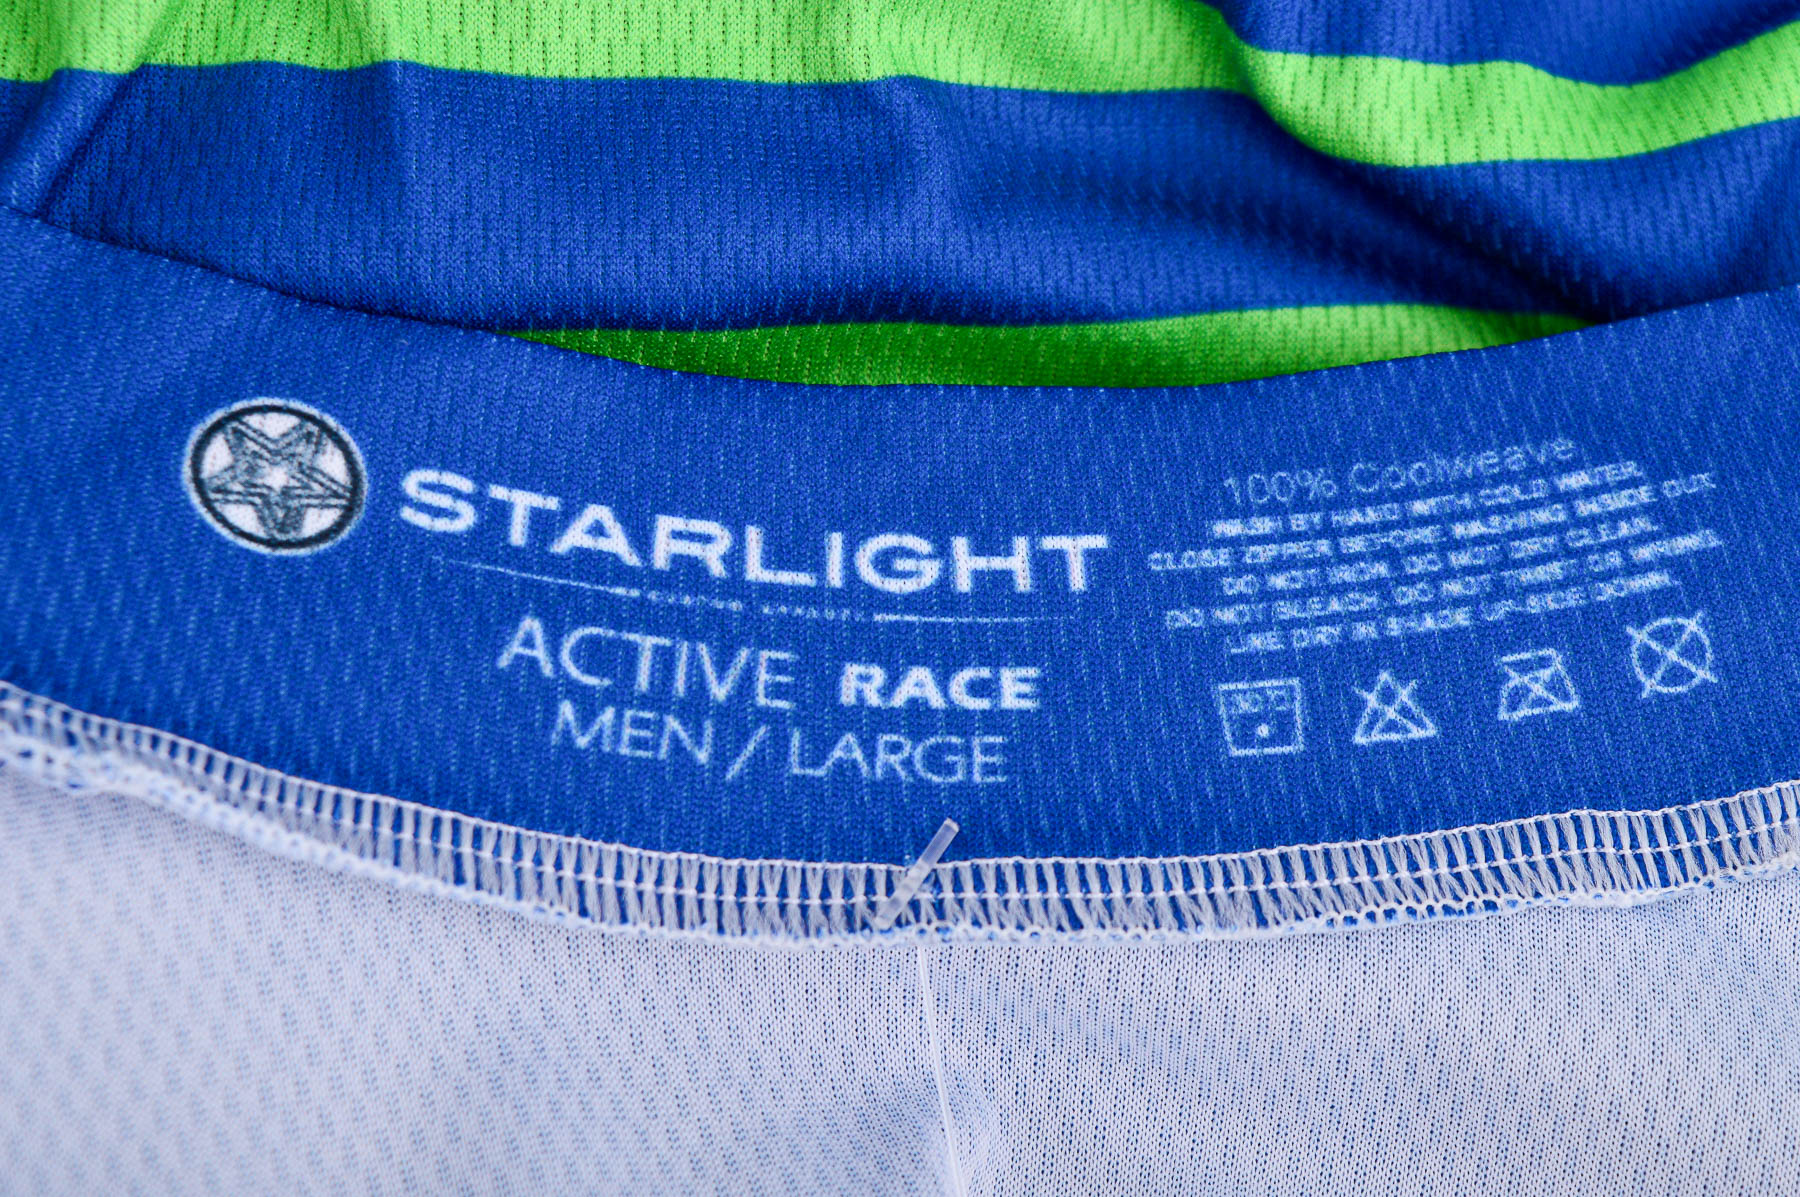 Male sports top for cycling - STARLIGHT - 2